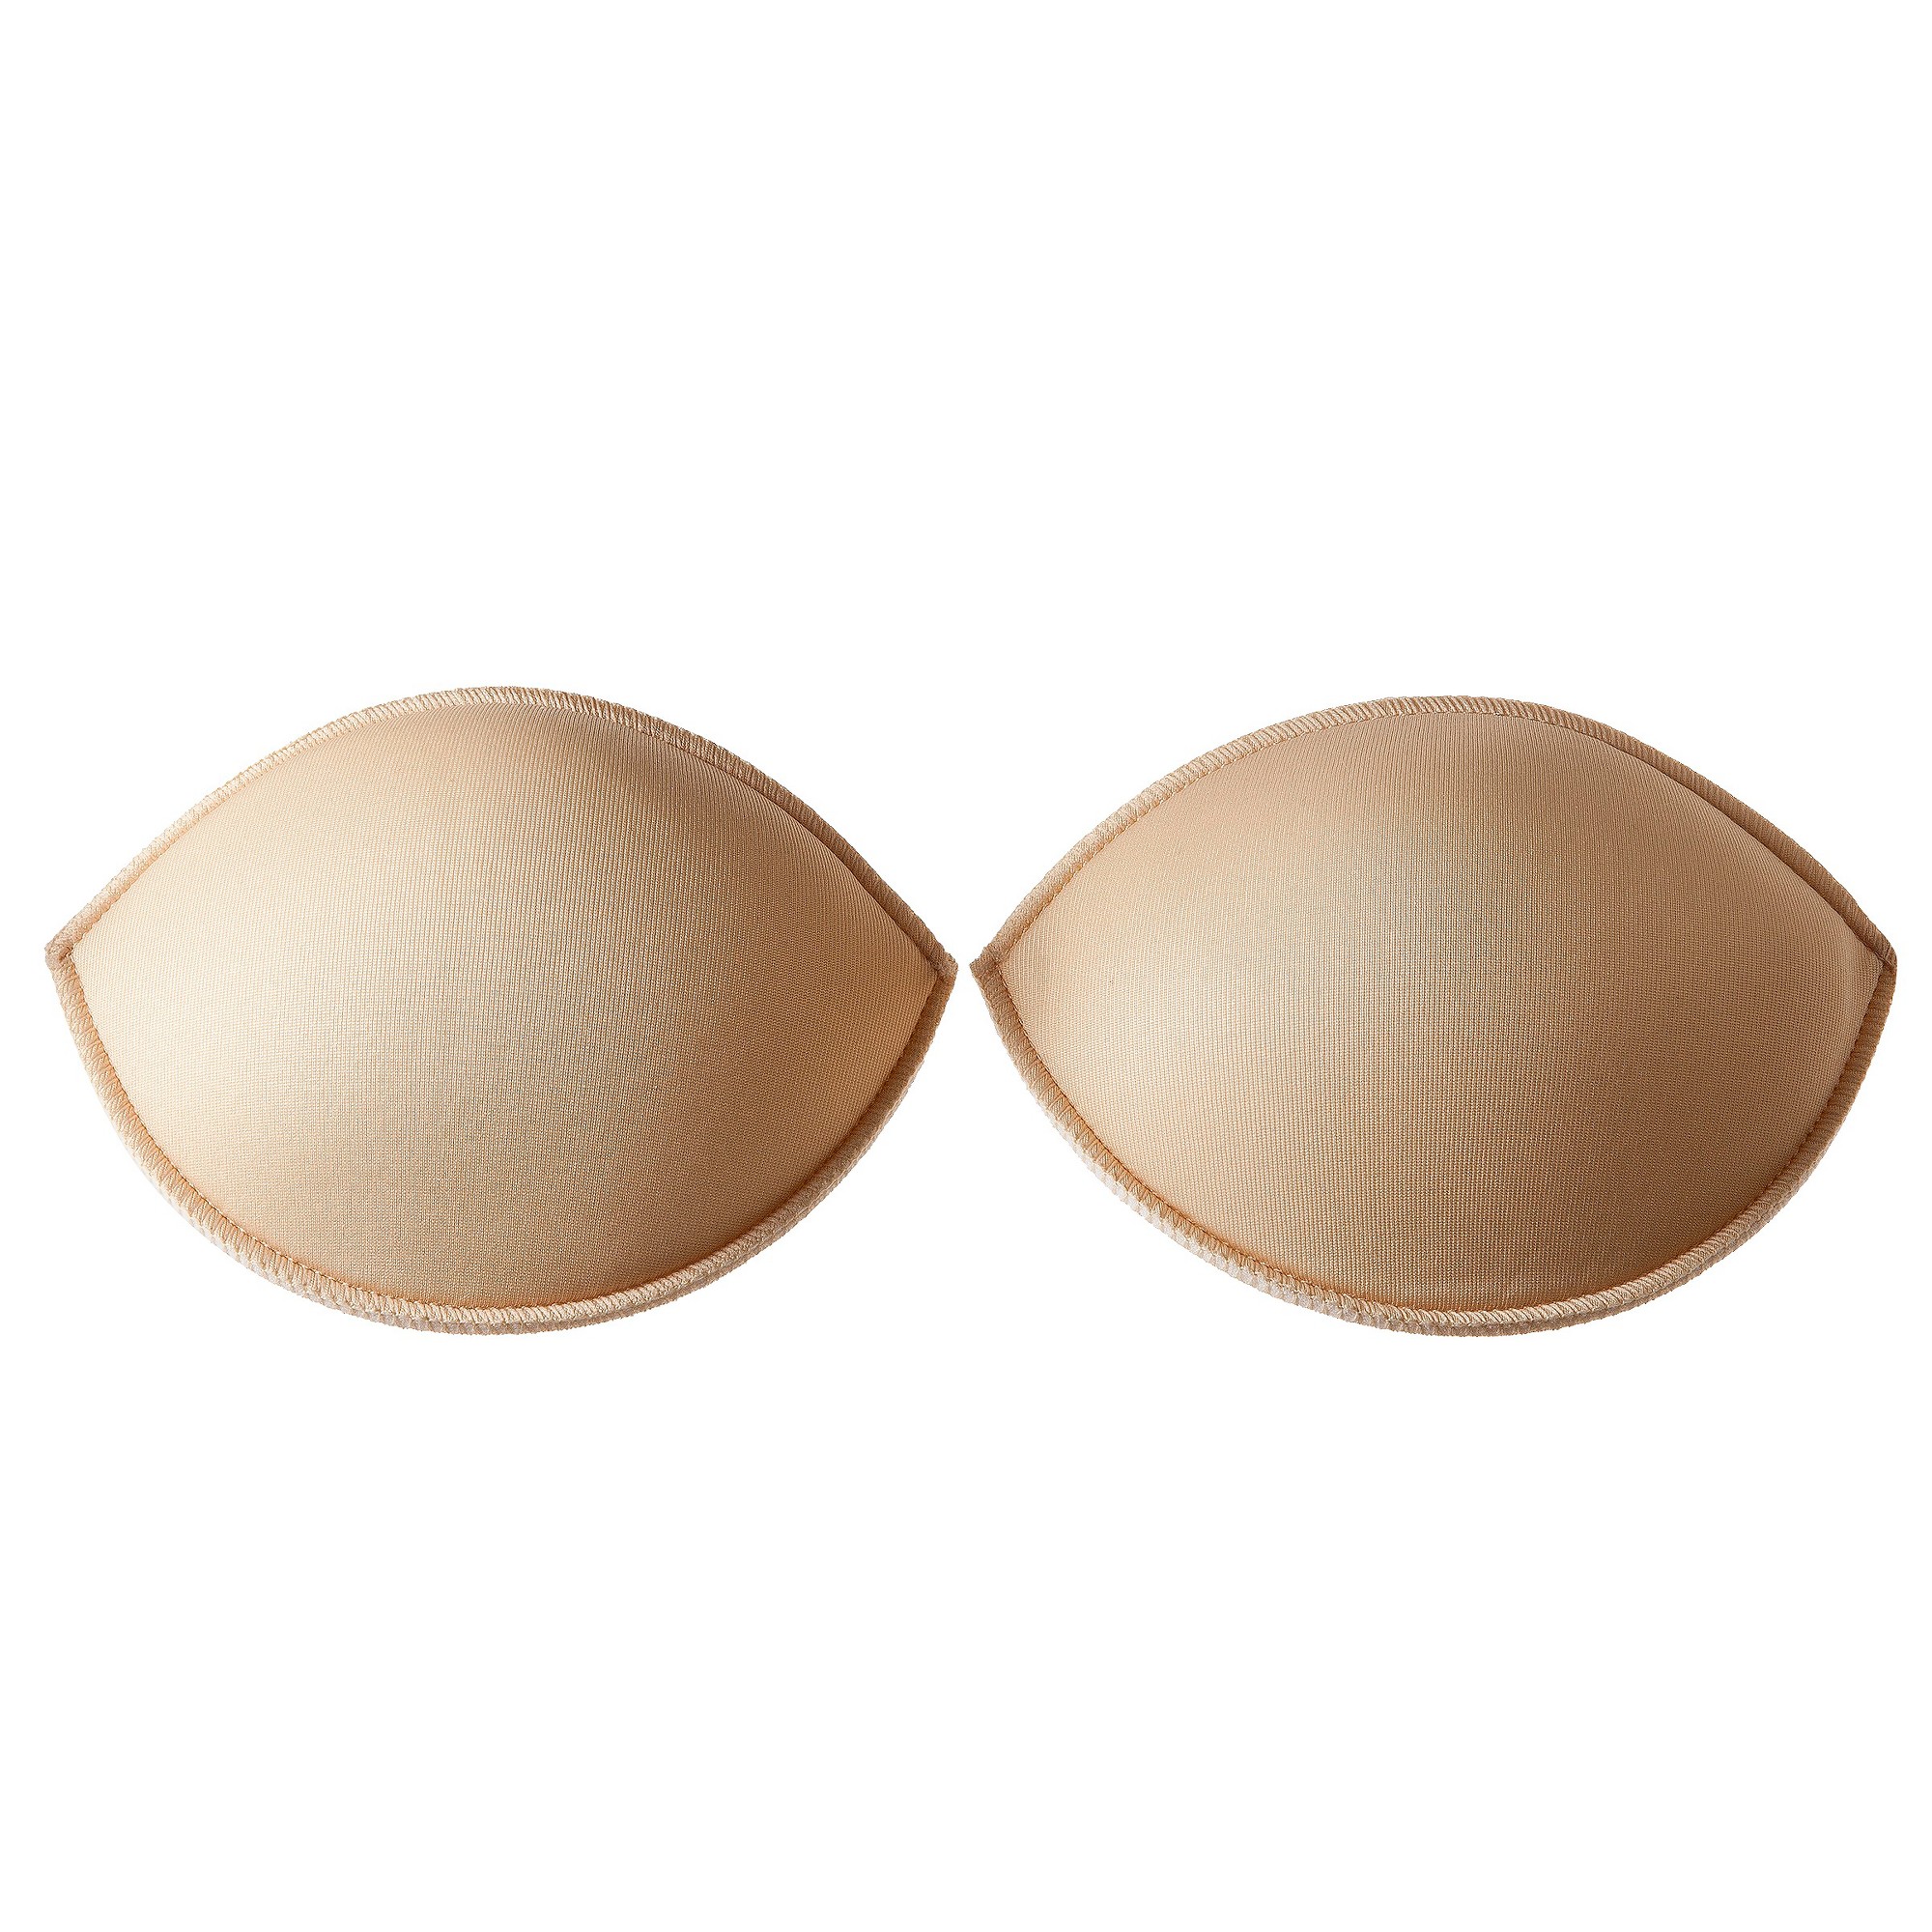 Fashion Forms Women's Water Wear Push-Up Pads - Nude A/B, White